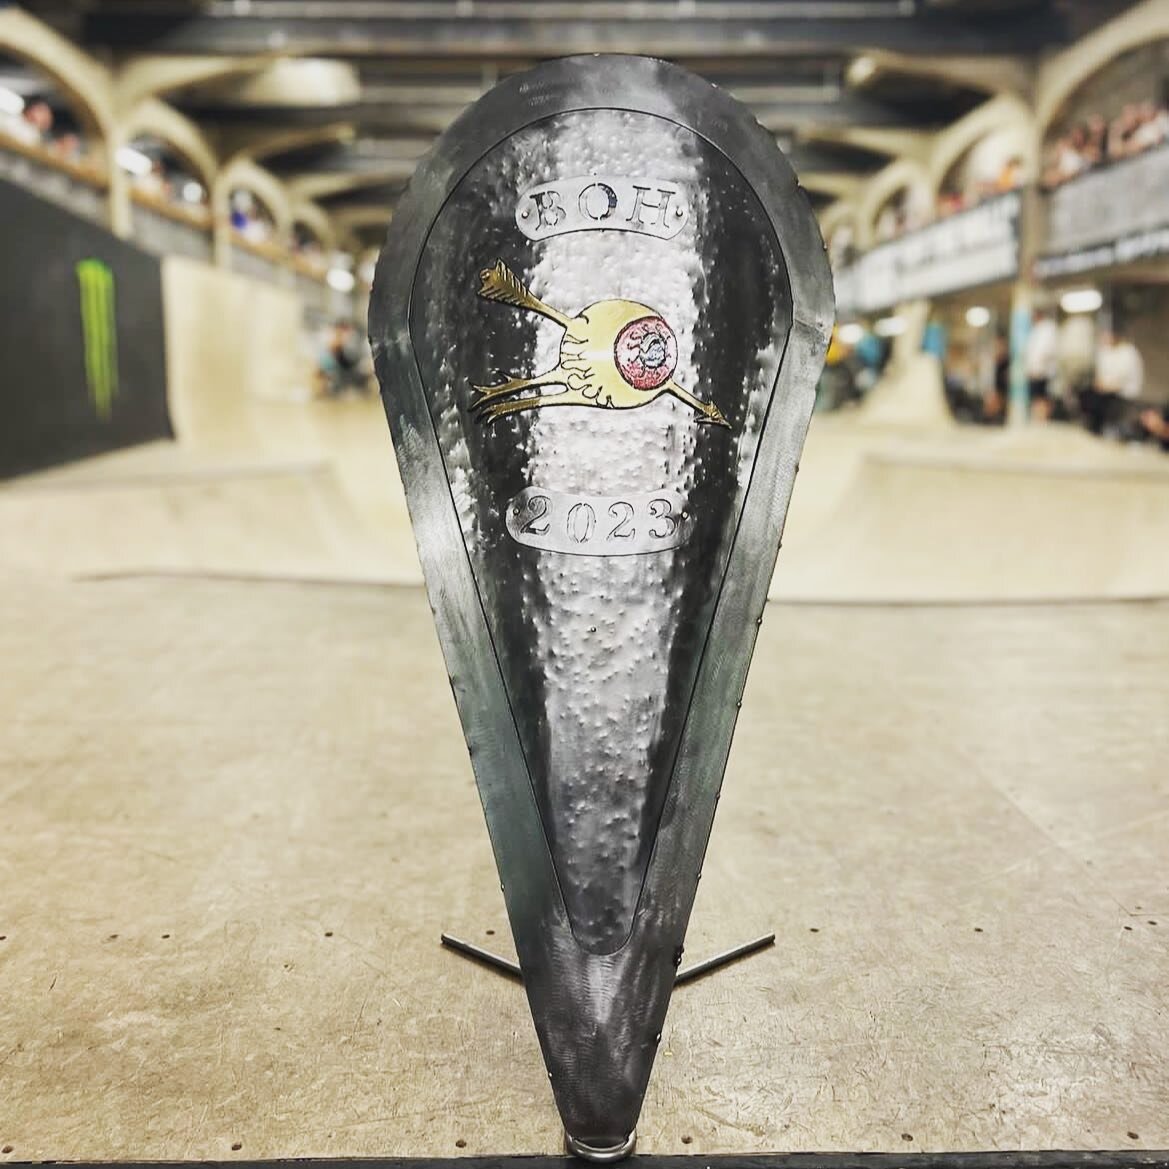 Always a pleasure to hand make the winners trophy for Source Bmx&hellip; this year we went with a beaten and planished steel shield with the arrow through the eye hand engraved and painted.. 

#jakerobbinsvintageengineering #fabrication #handmade #ha